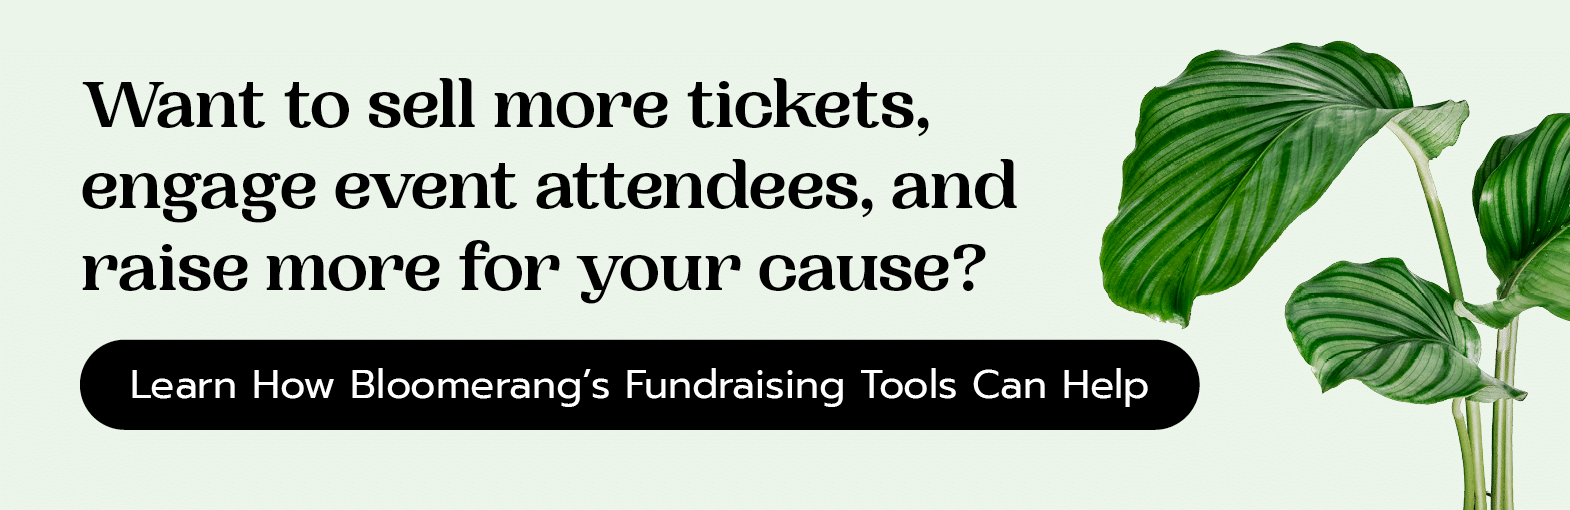 Want to sell more tickets, engage event attendees, and raise more for your cause? Find out how Bloomerang’s fundraising tools can help.